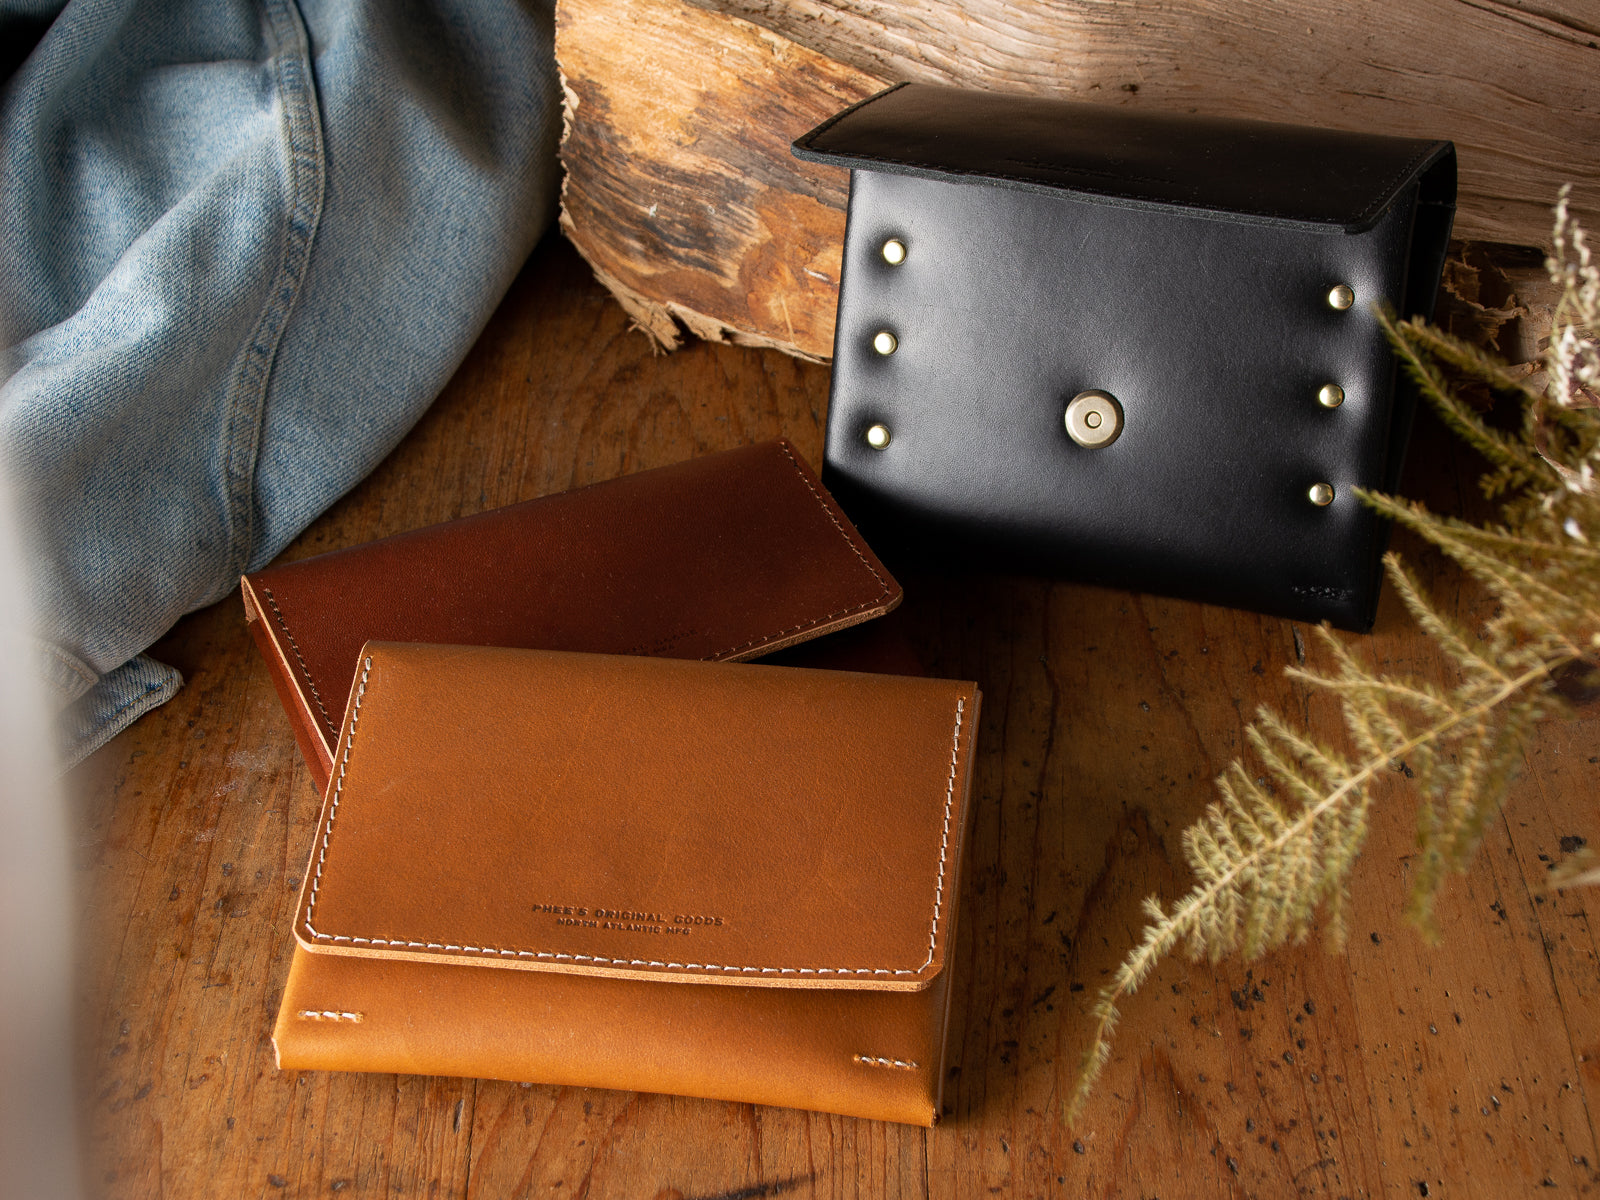 Three fly fishing wallets sitting on wooden table displaying all three available colours, brown, tan, and black.